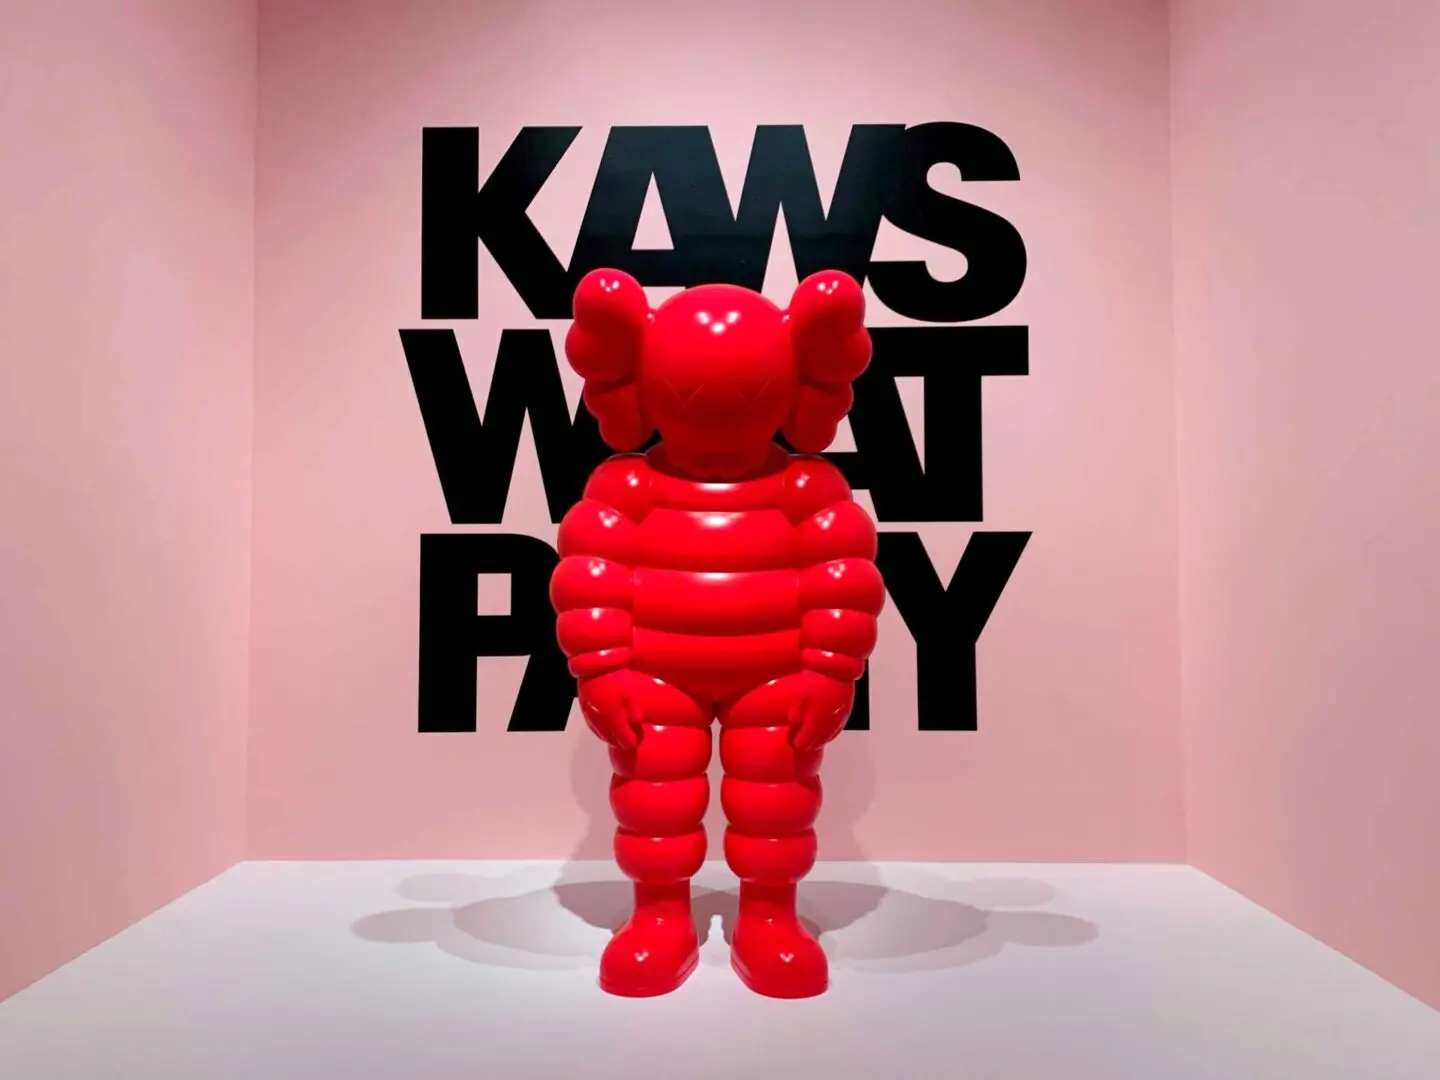 A red balloon bear is in front of the word " kws what party ".